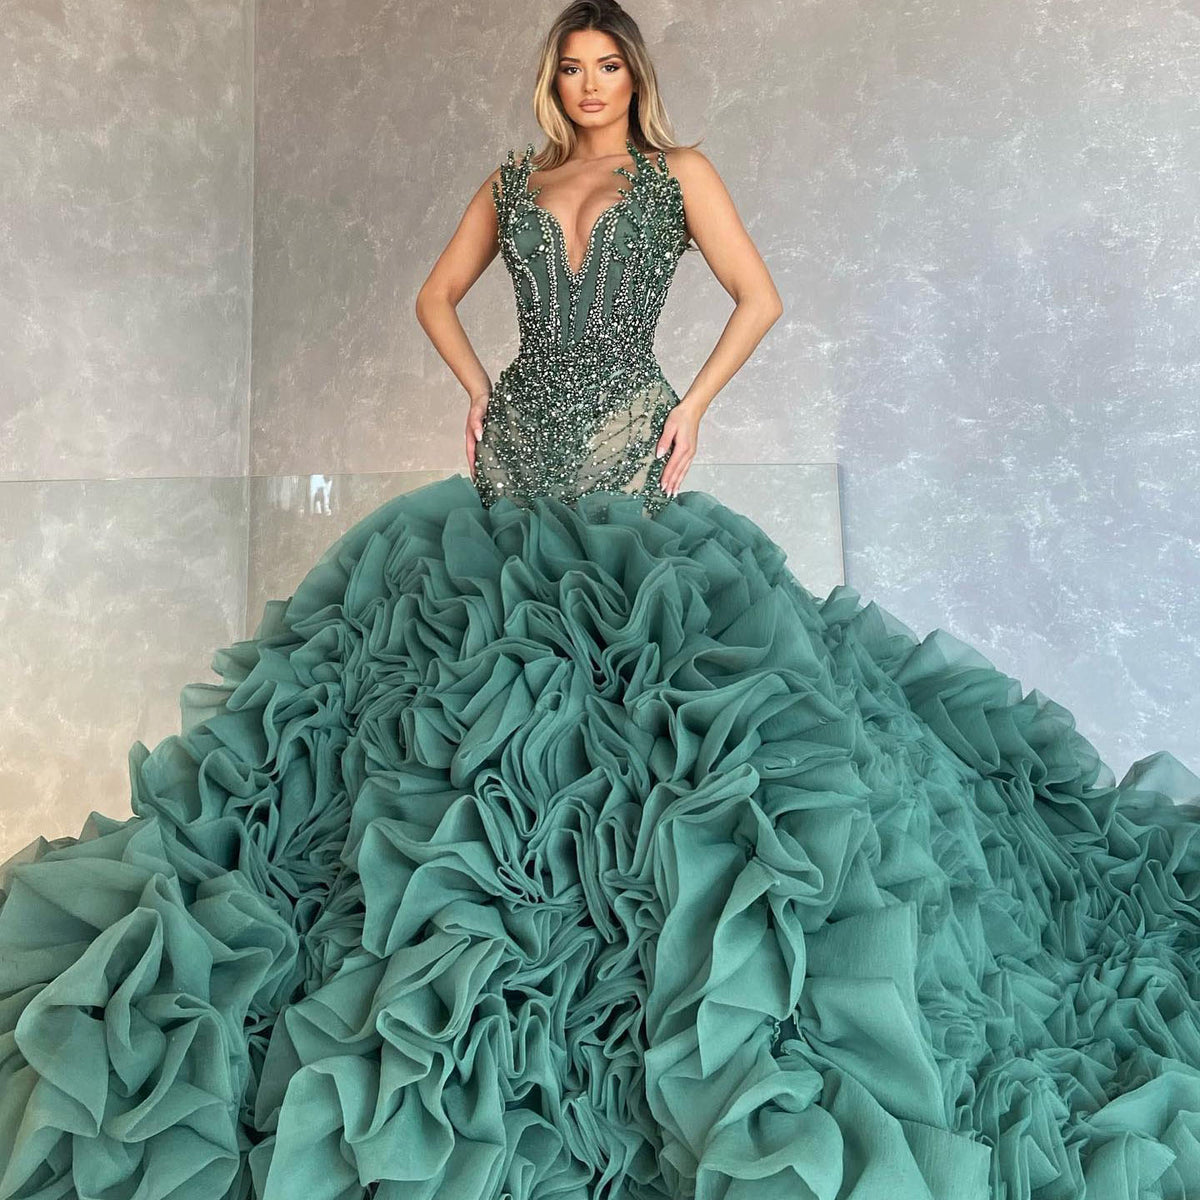 Luxury Emerald Green Beaded Mermaid Evening Dresses Ruffles Tiered Tulle Evening Gowns